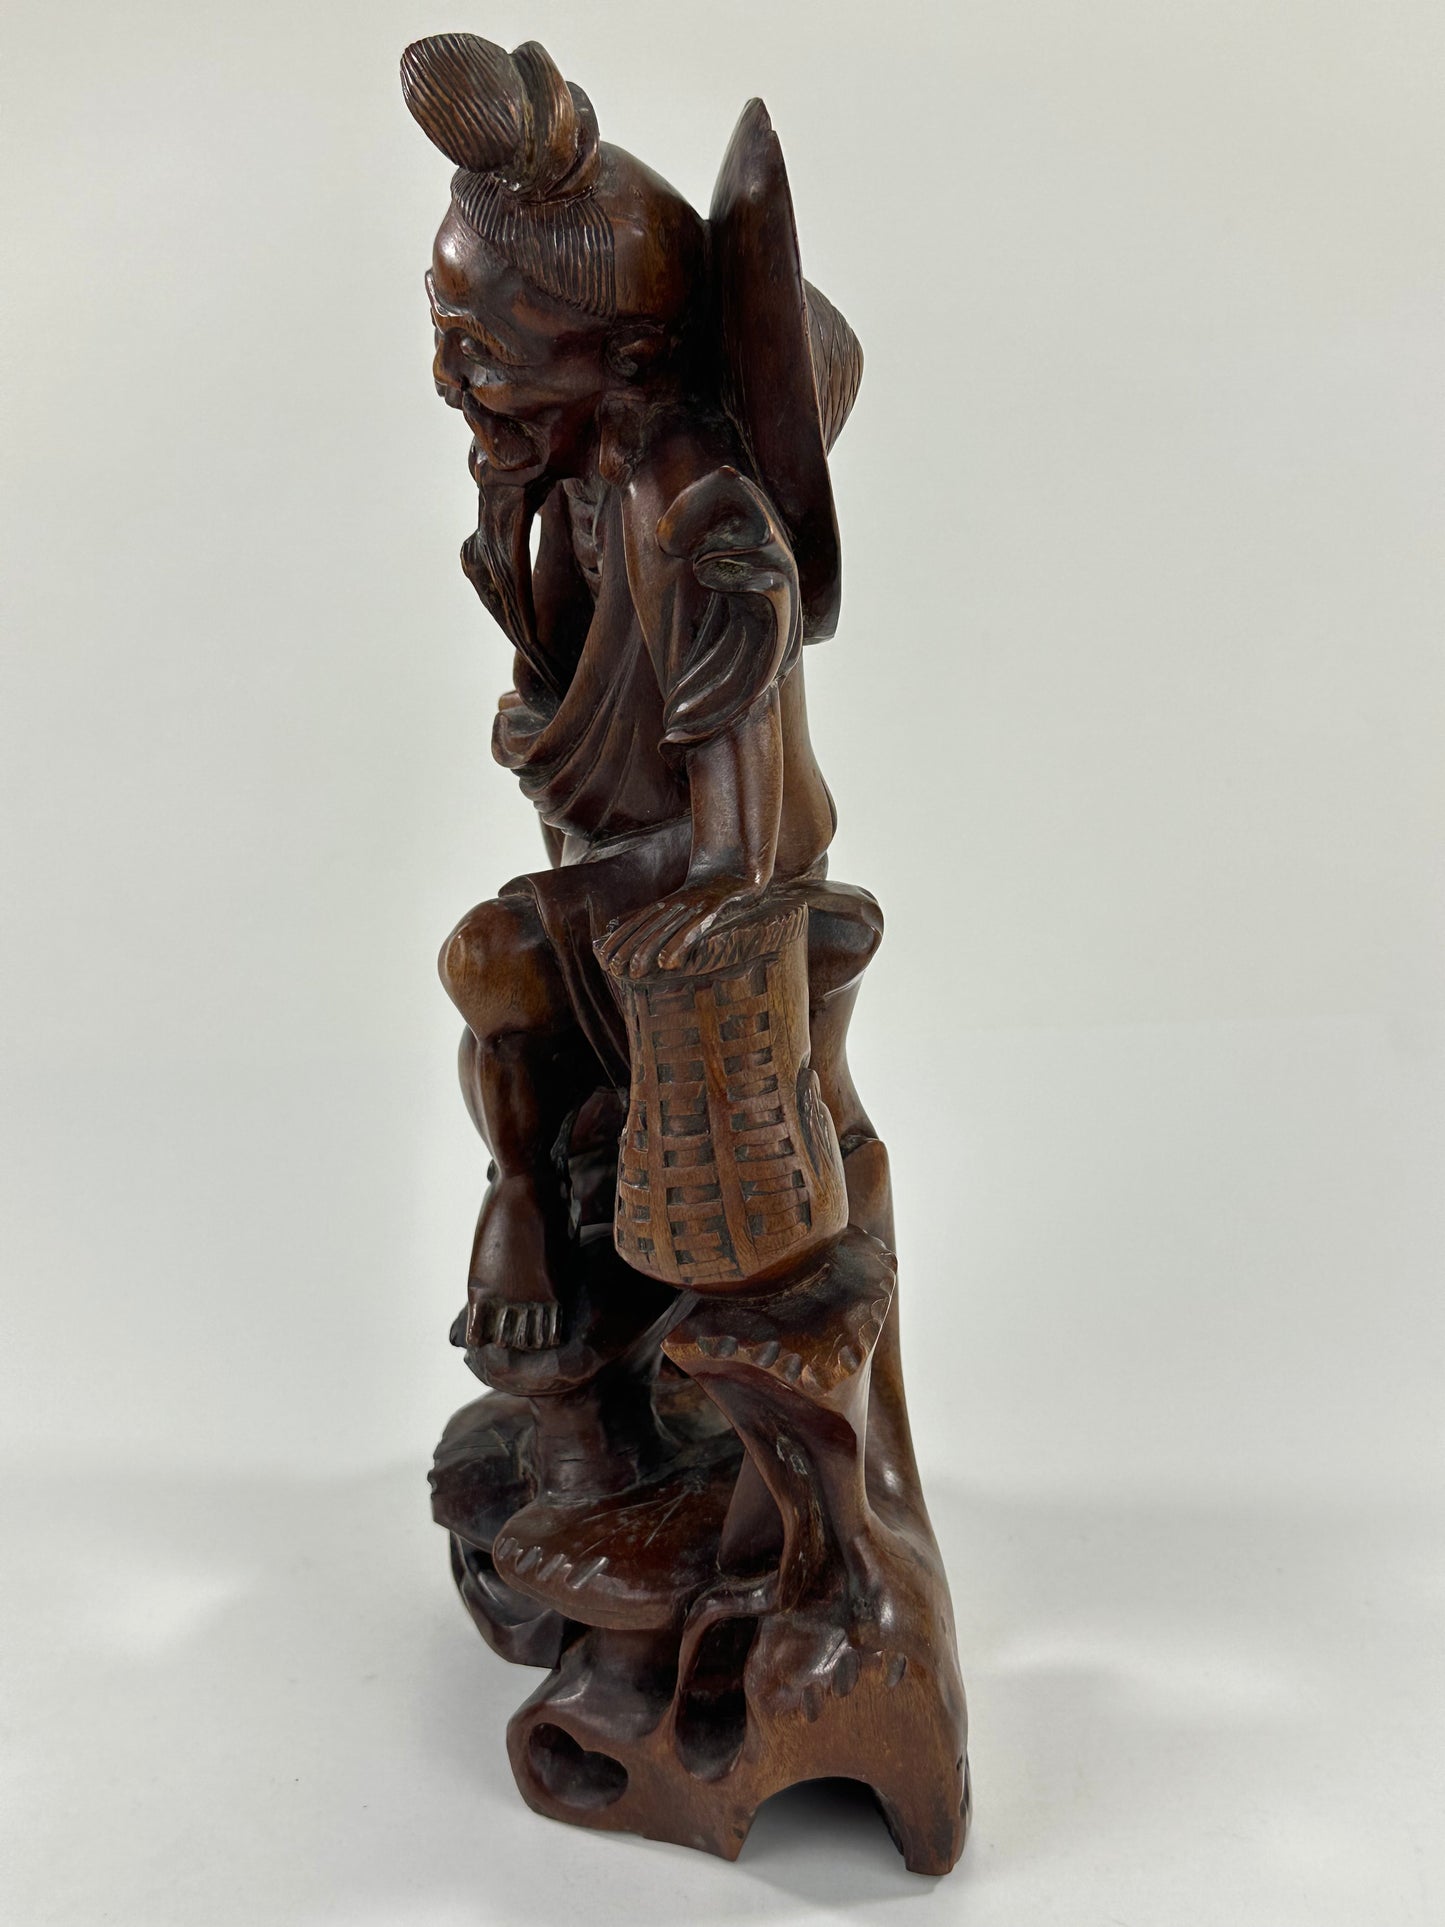 Antique Chinese Carved Wooden Statue of Shoulao 12”